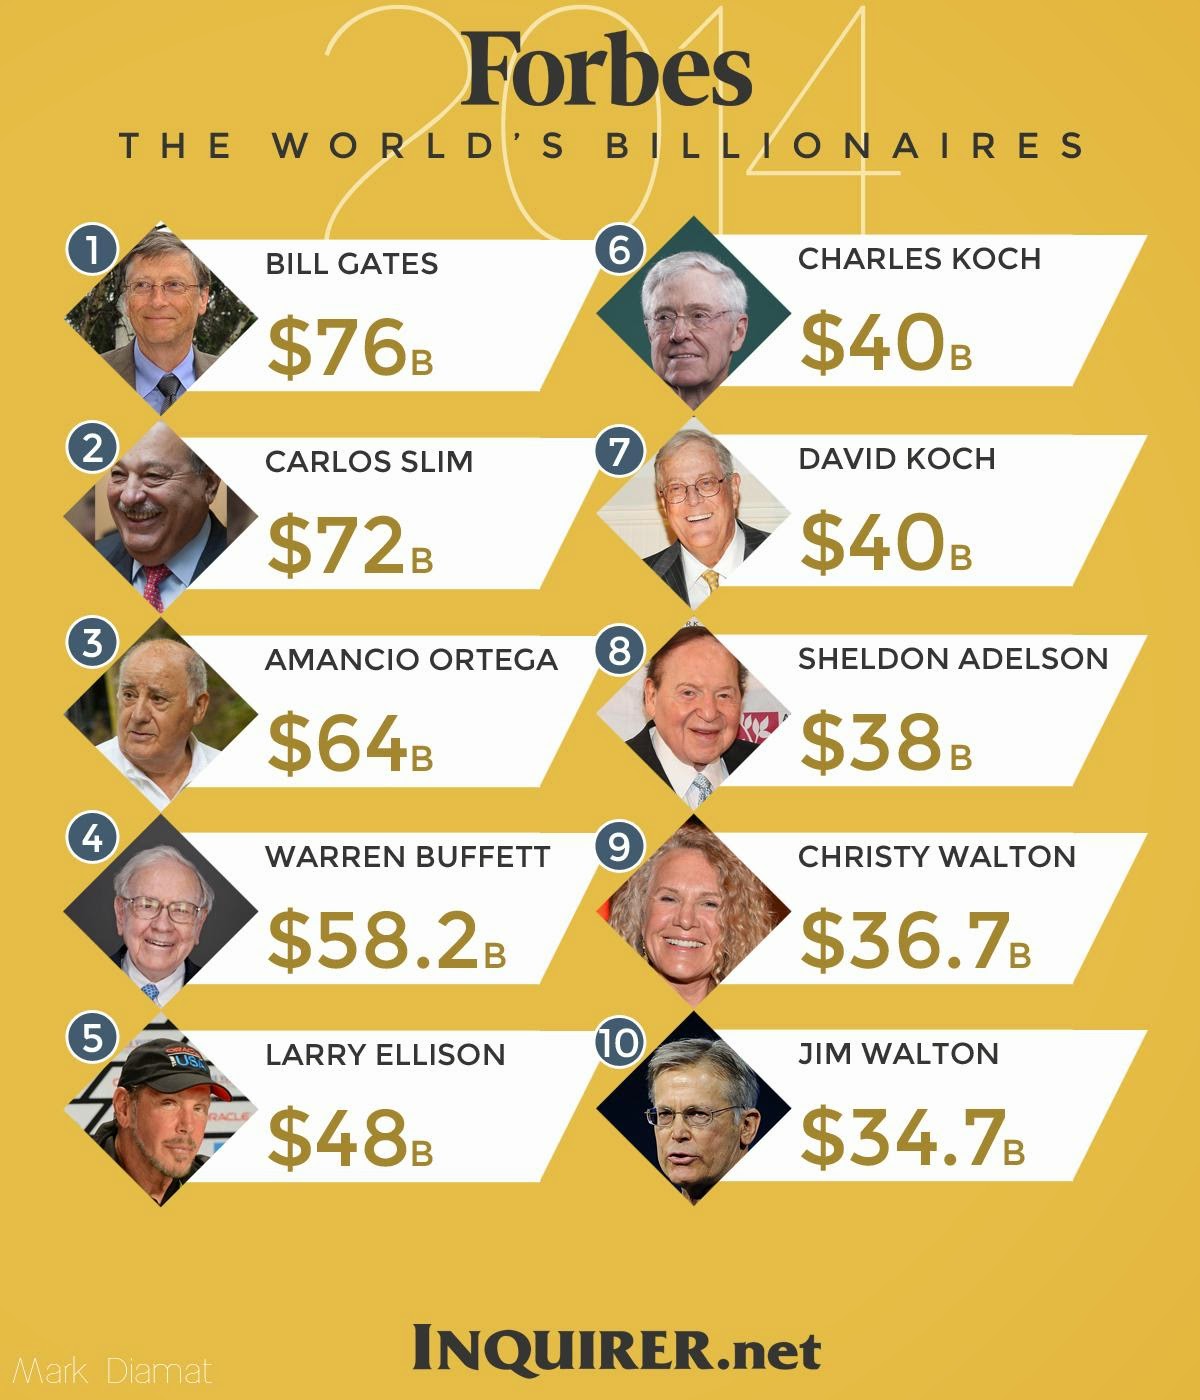 Top 10 Wealthiest People in the World: 2014 Edition